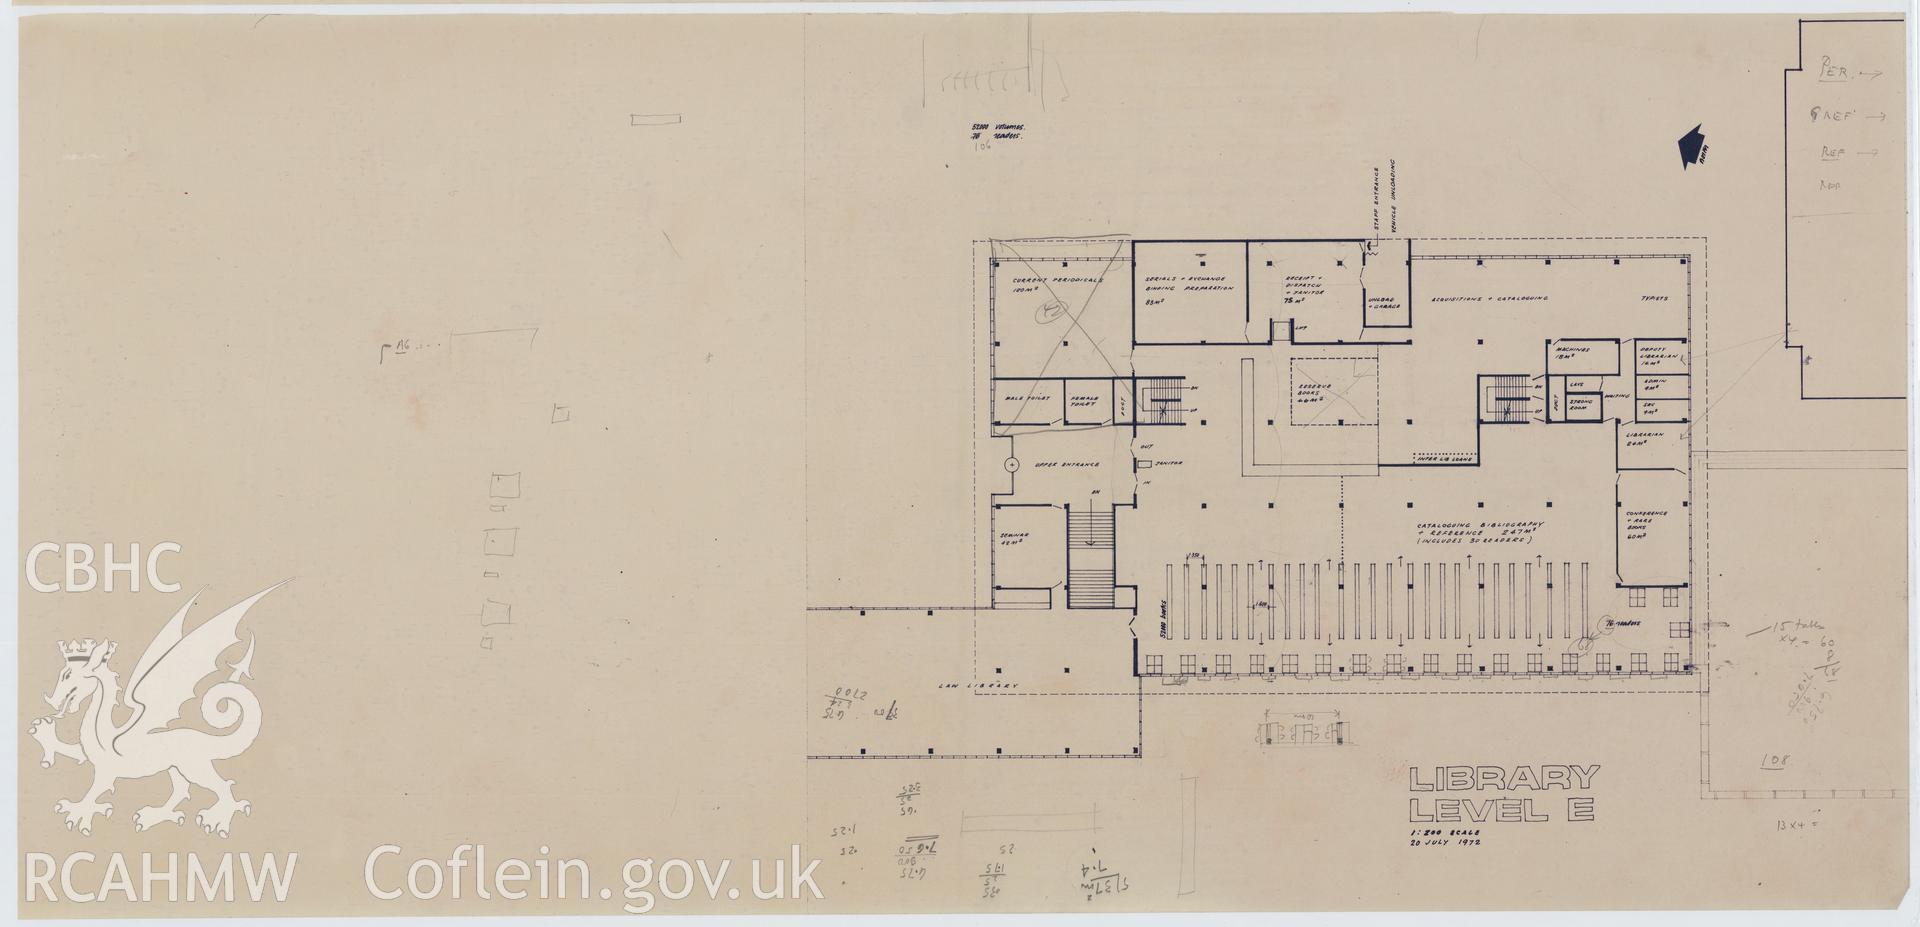 Digital copy of a plan showing Library Level E of the proposed Library Arts Complex at University College Aberystwyth, produced by Percy Thomas Partnership. Scale 1:200.